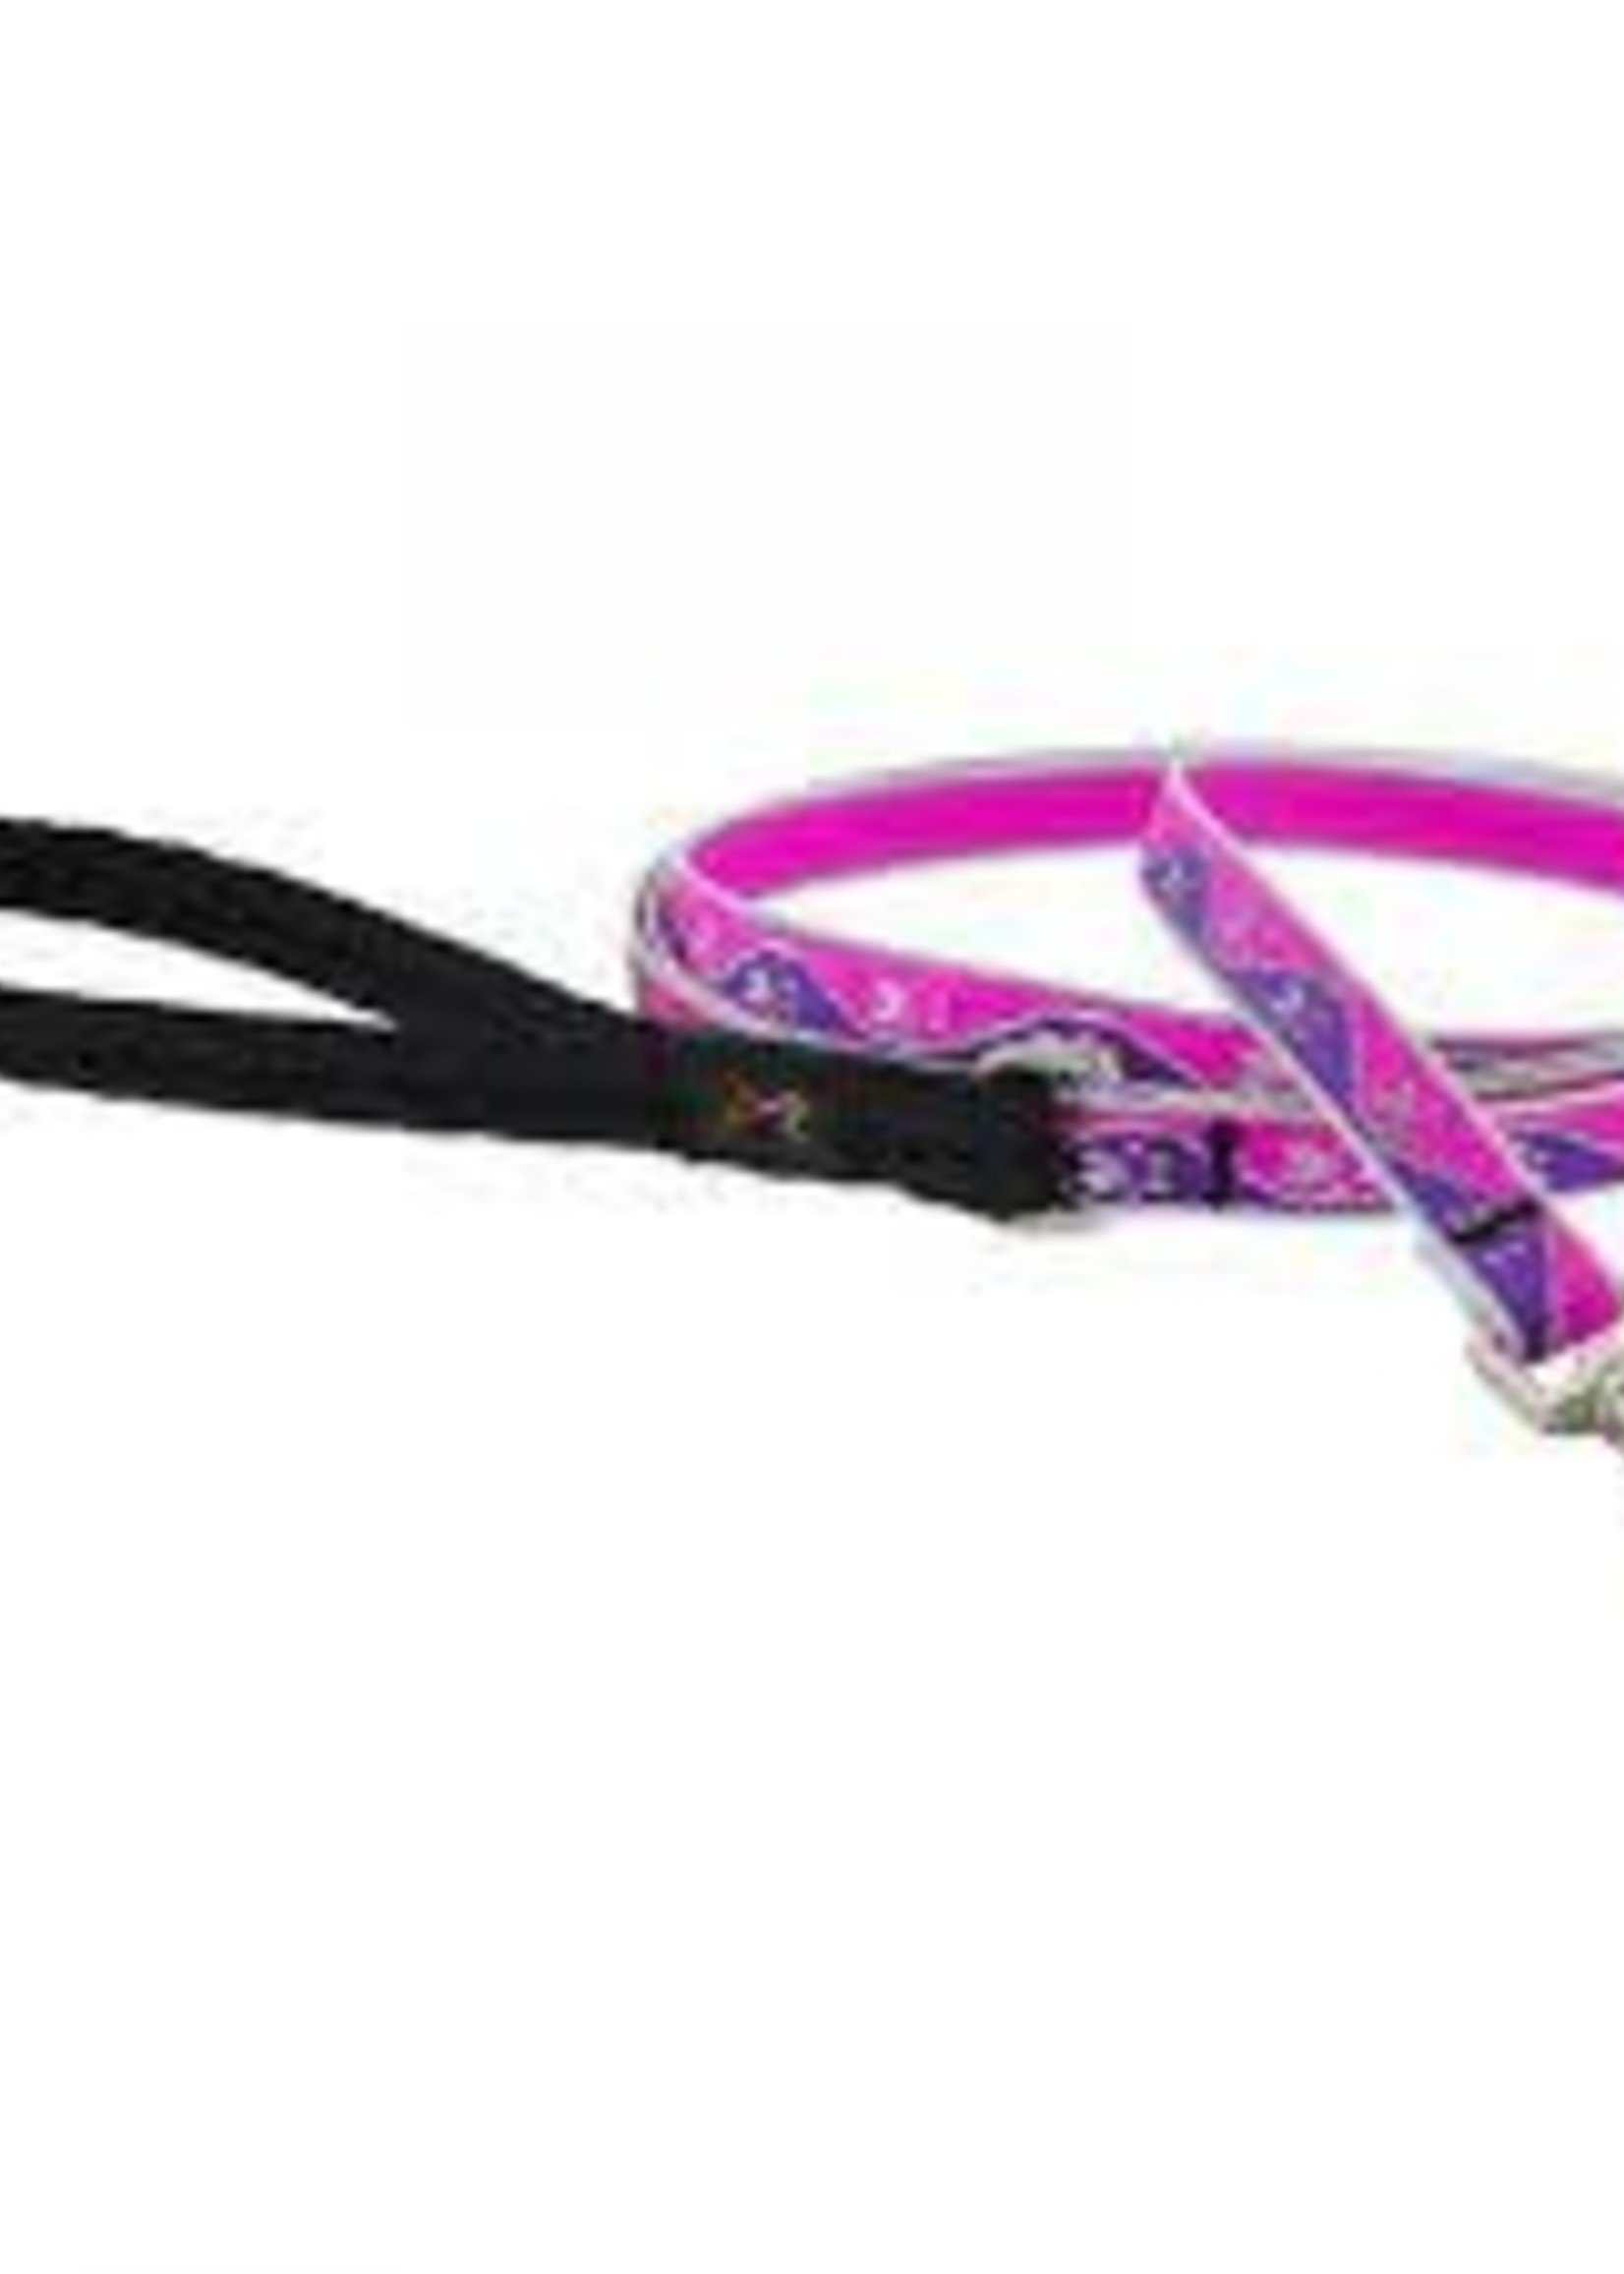 LupinePet Lupine 3/4in Pink Paws Reflective 6ft Leash